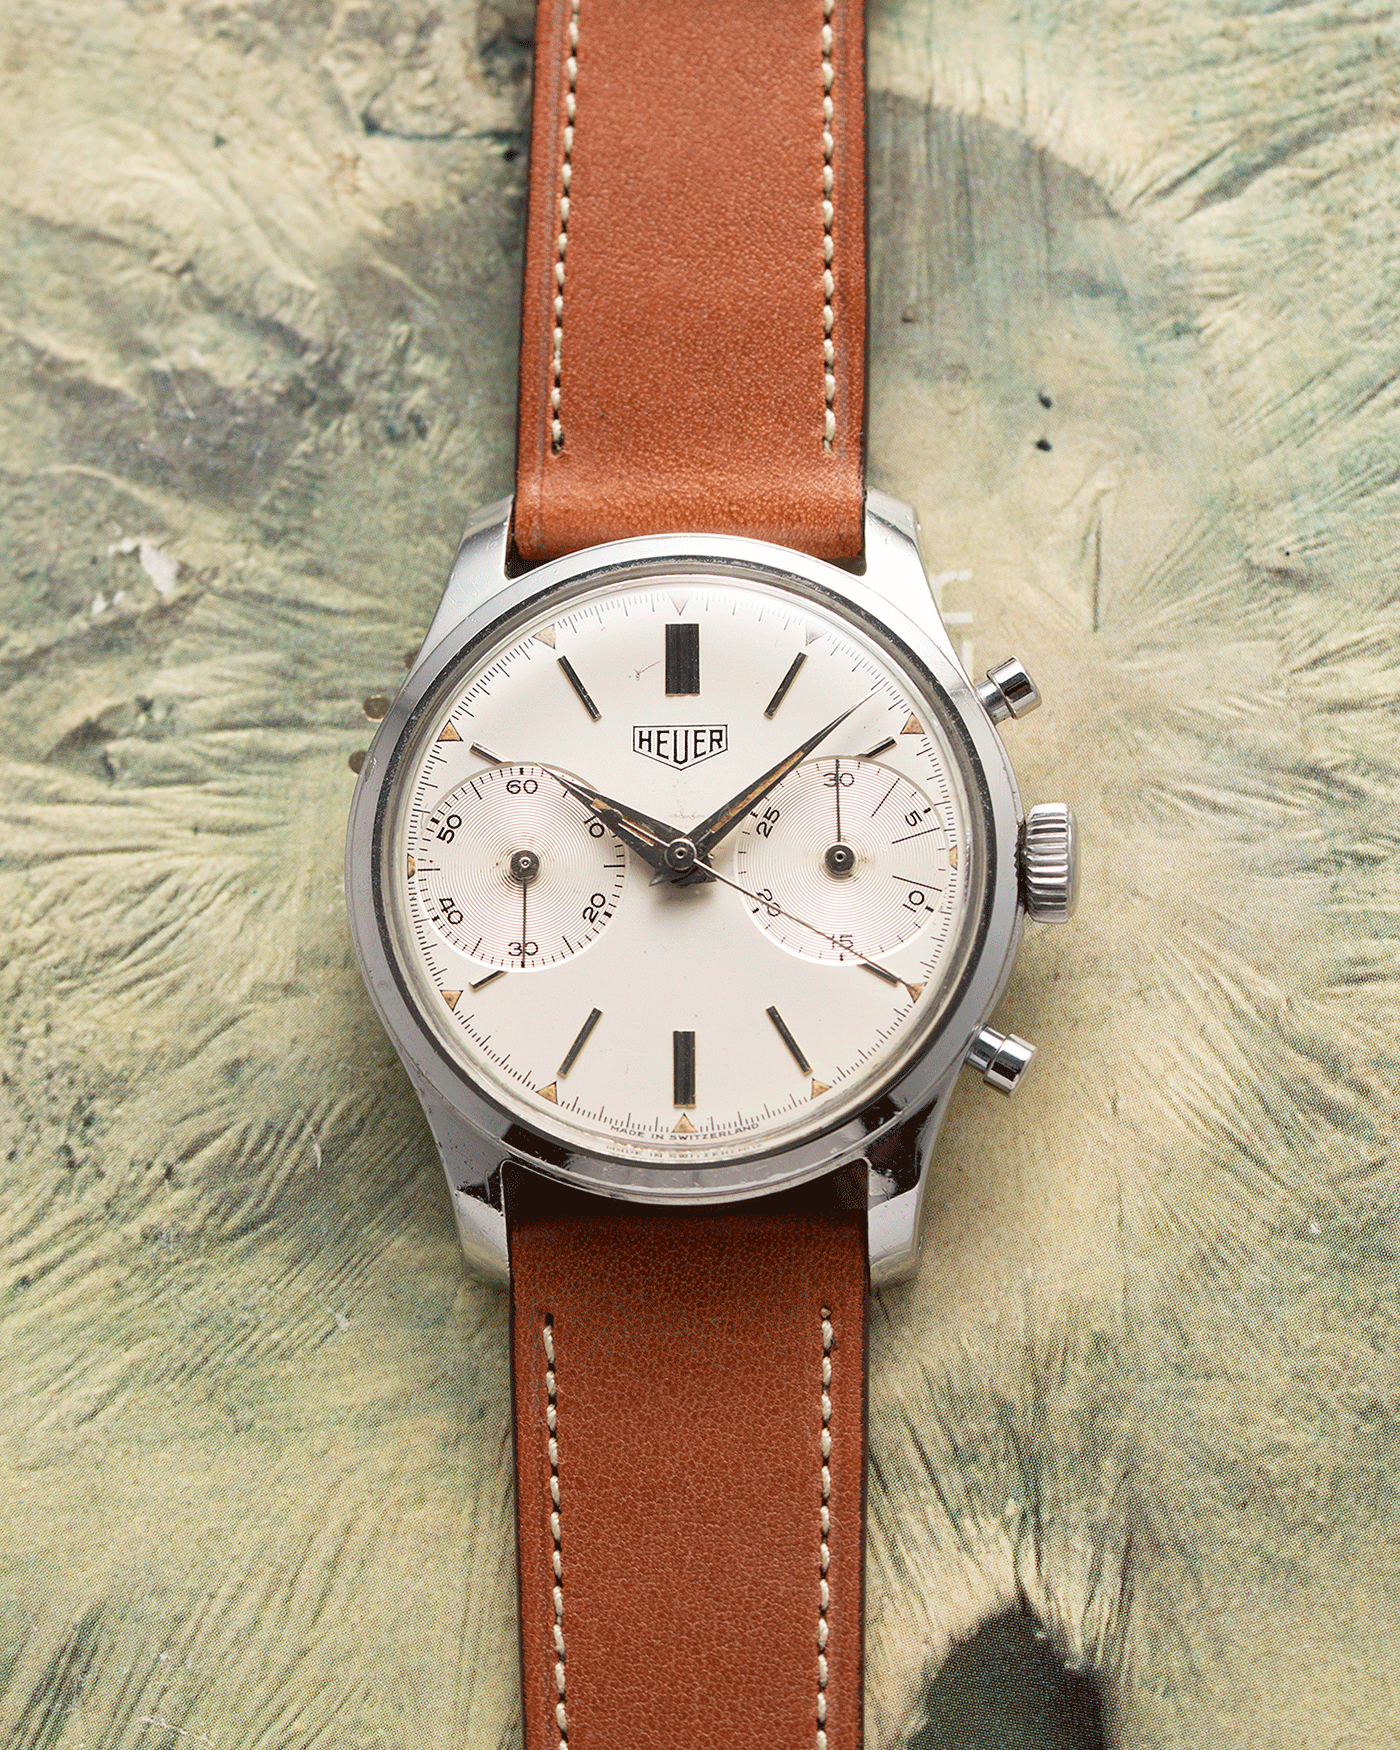 Brand: Heuer Year: 1950’s Reference Number: 404 Material: Stainless Steel Movement: Valjoux 23 Case Diameter: 34mm Lug Width: 18mm Bracelet/Strap: Nostime Gold Tan Barenia Smooth Calf